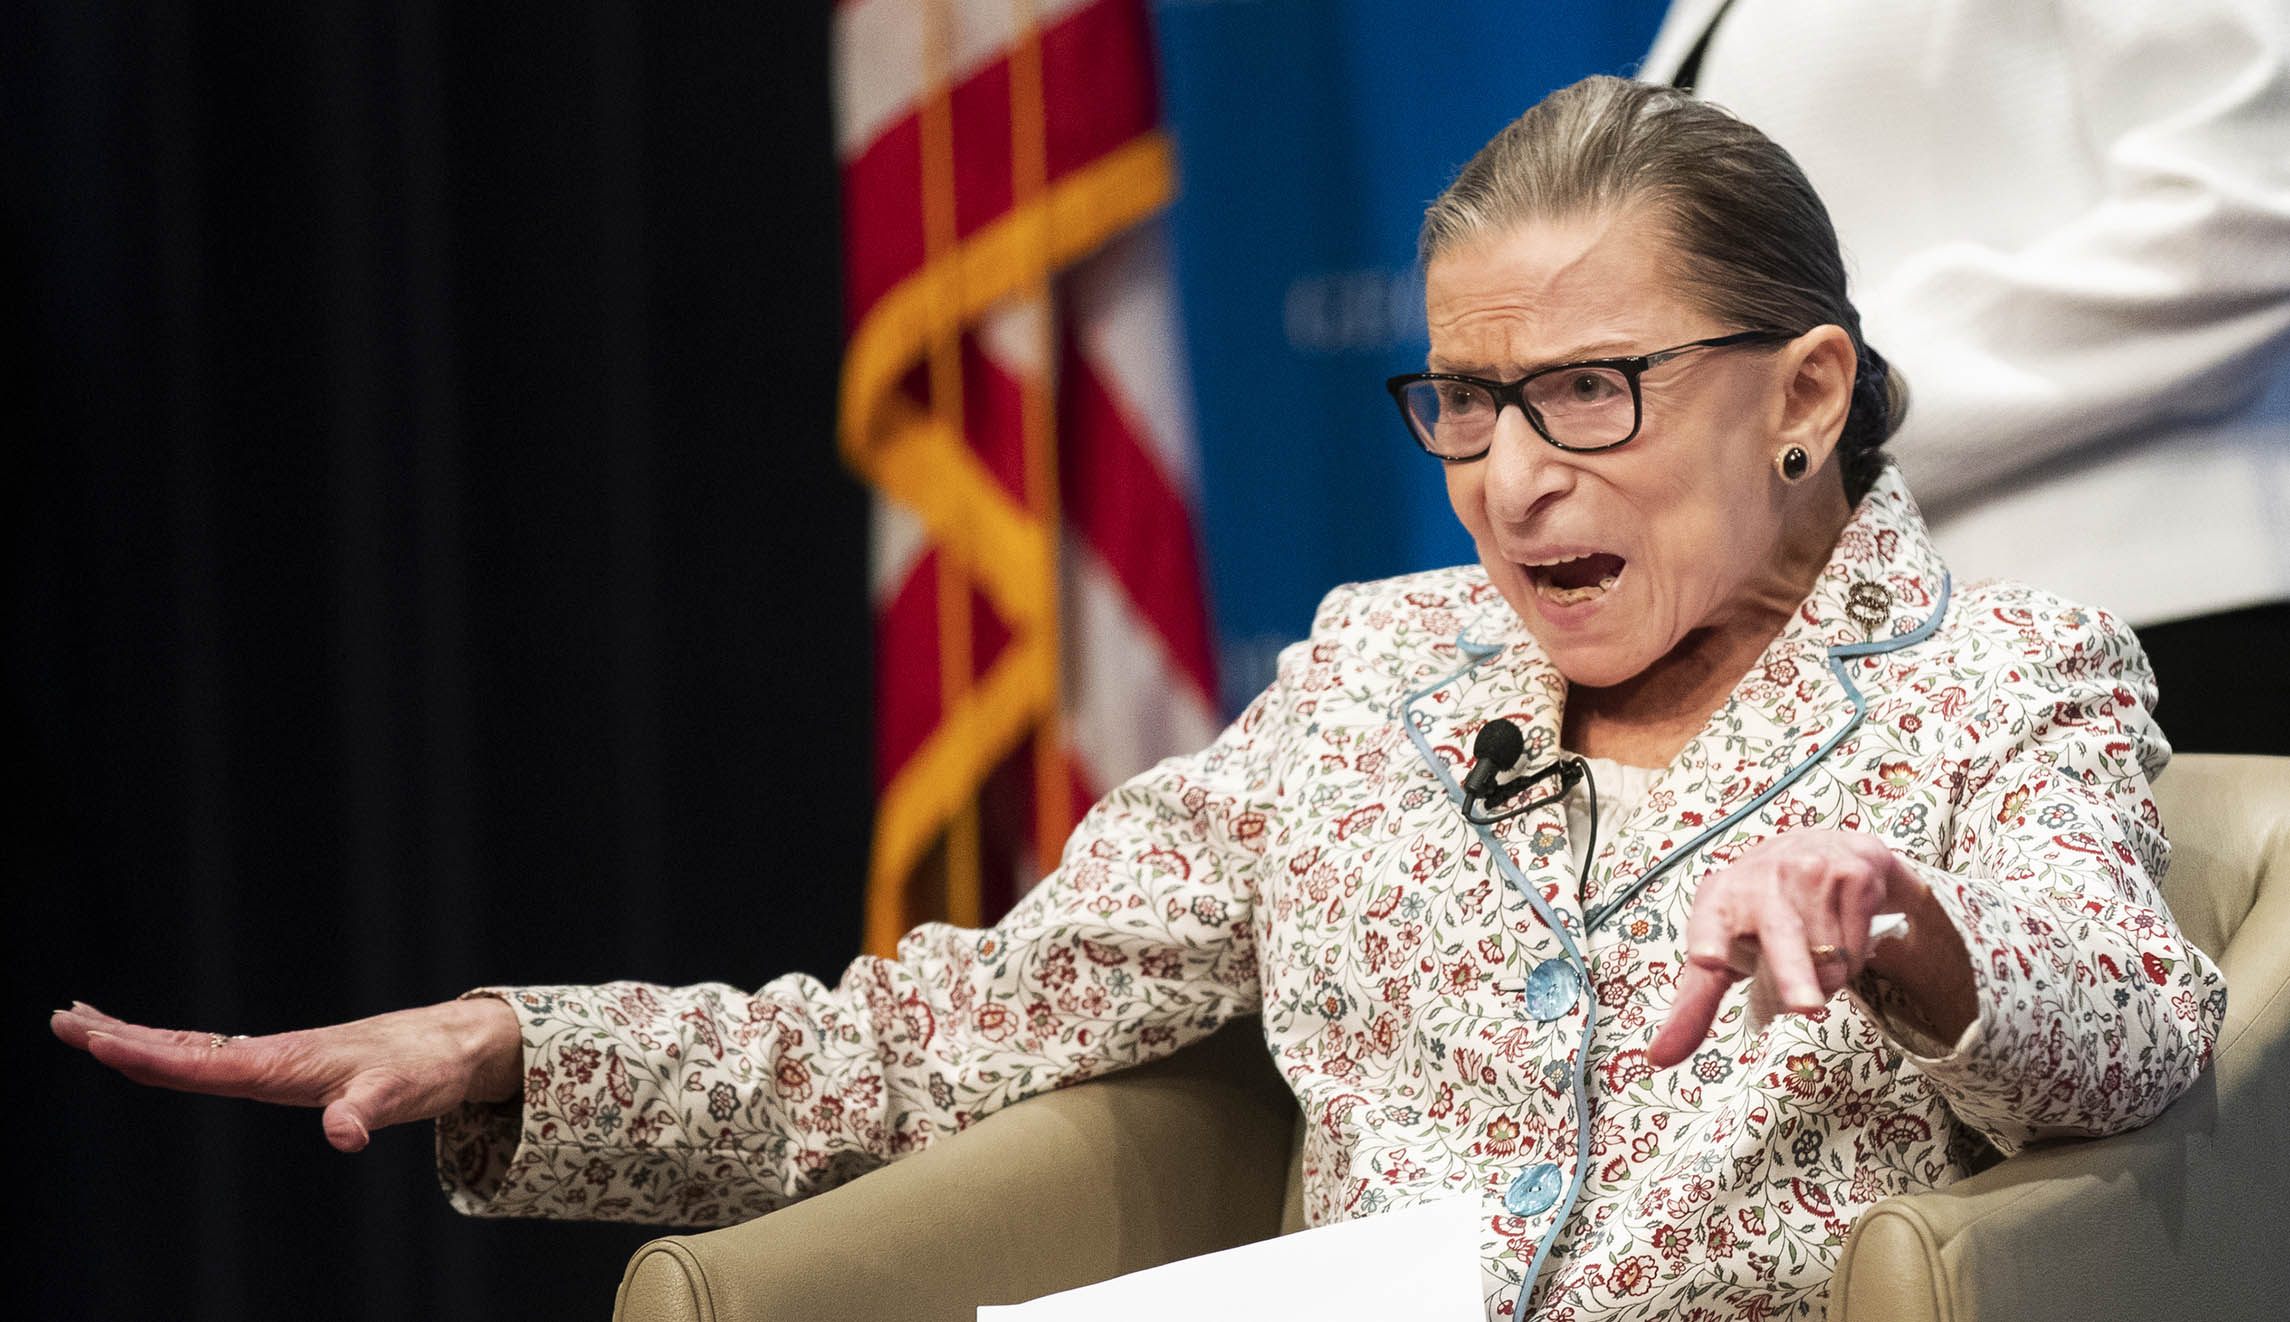 Supreme Court Associate Justice Ruth Bader Ginsburg gestures as the invited guests applaud while she gets seated at Georgetown University Law Center in Washington.